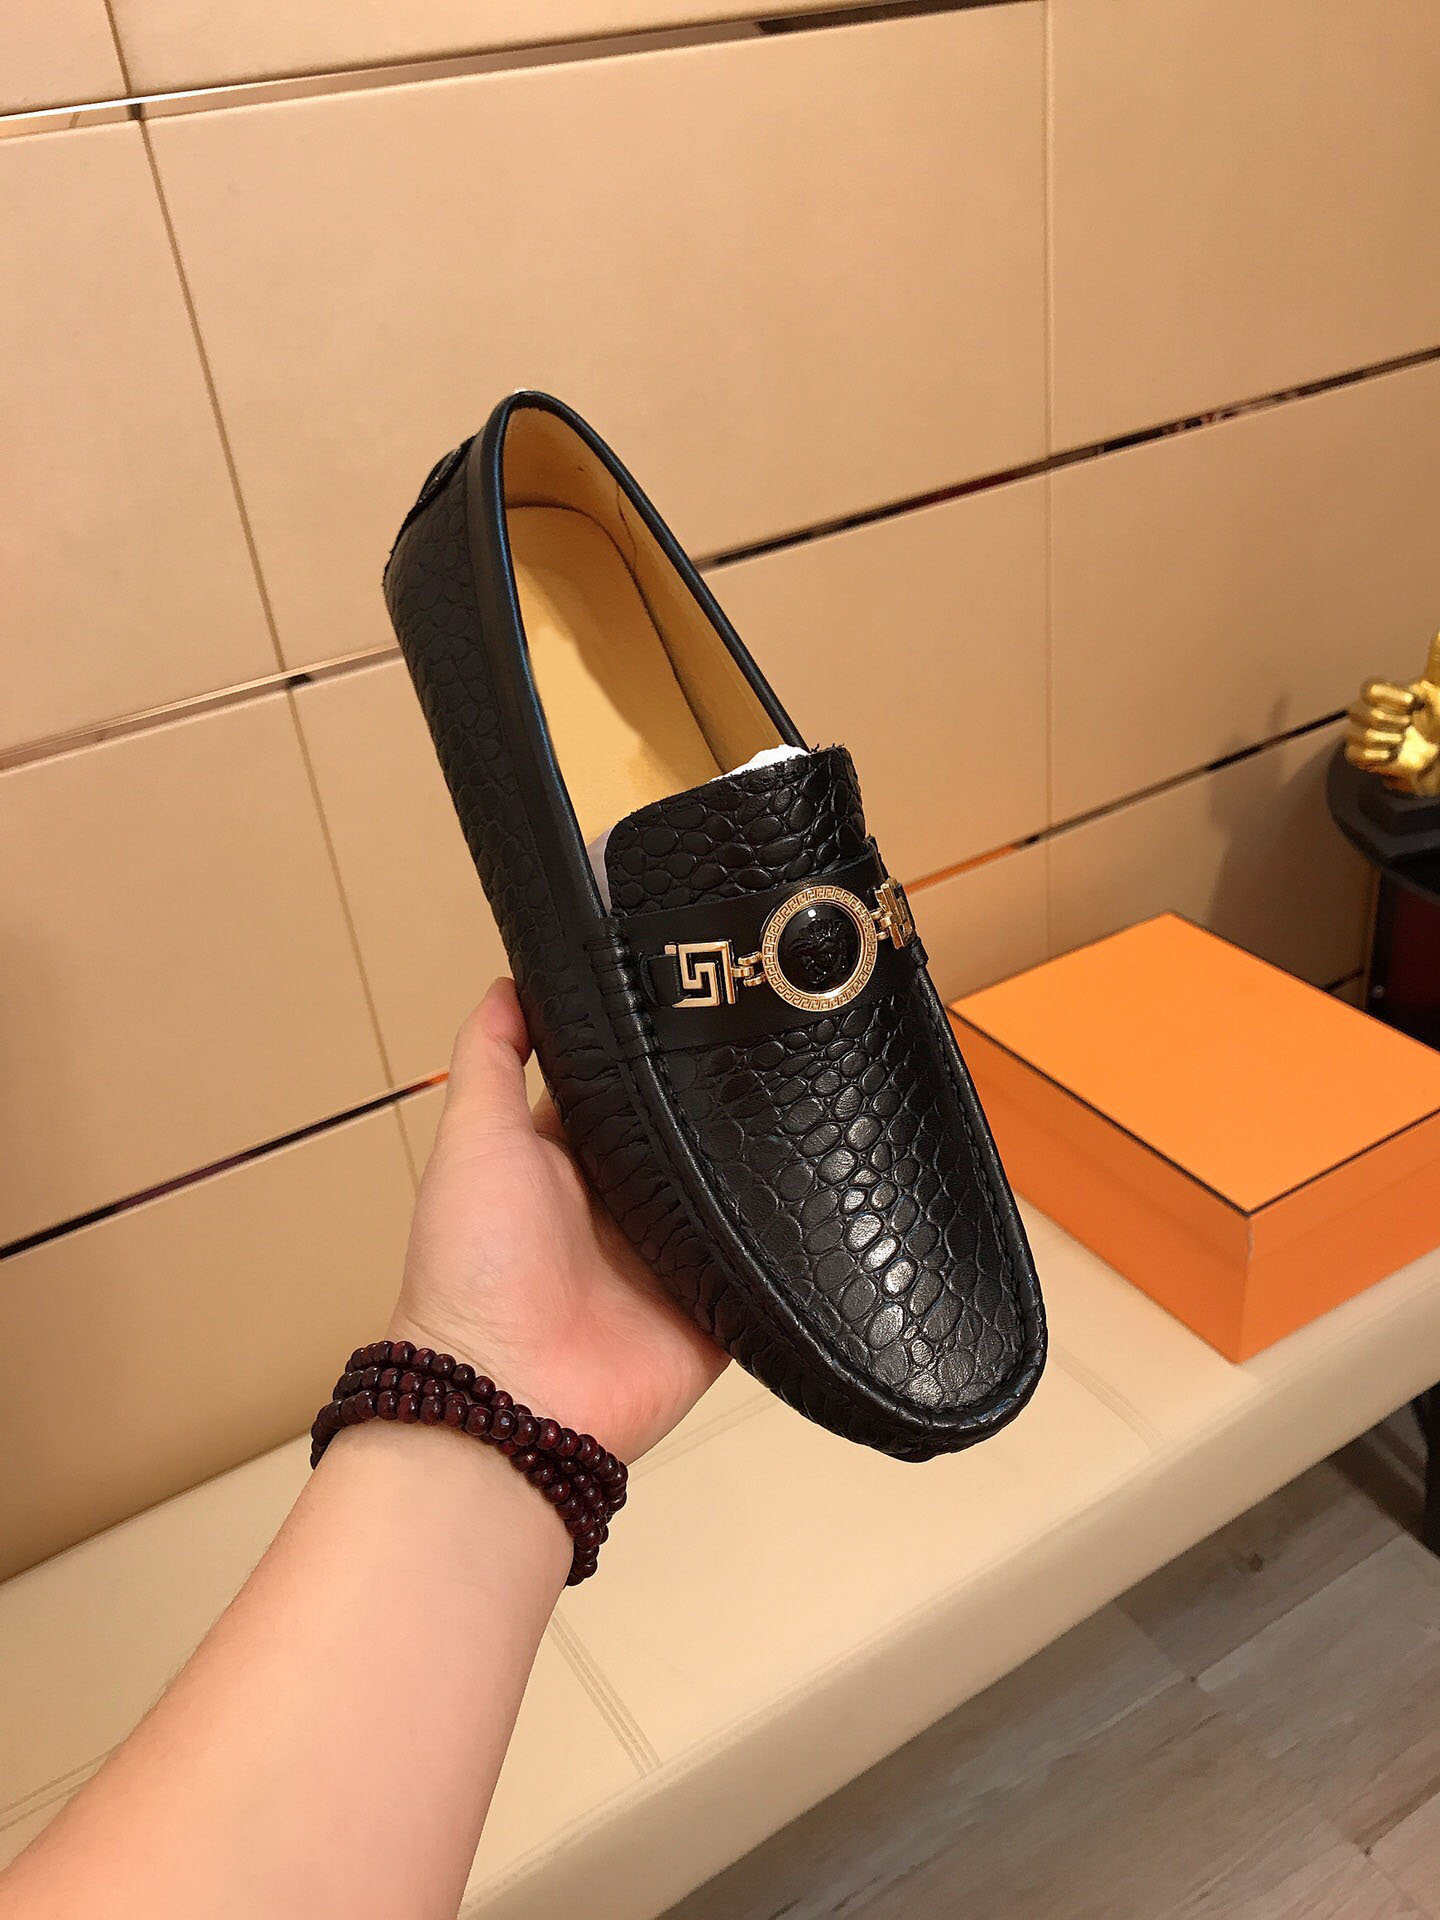 New Men Party Wedding Business Dress Shoes Top Quality Brand Designer Flats Male Work Office Footwear Slip On Loafers Size 38-44